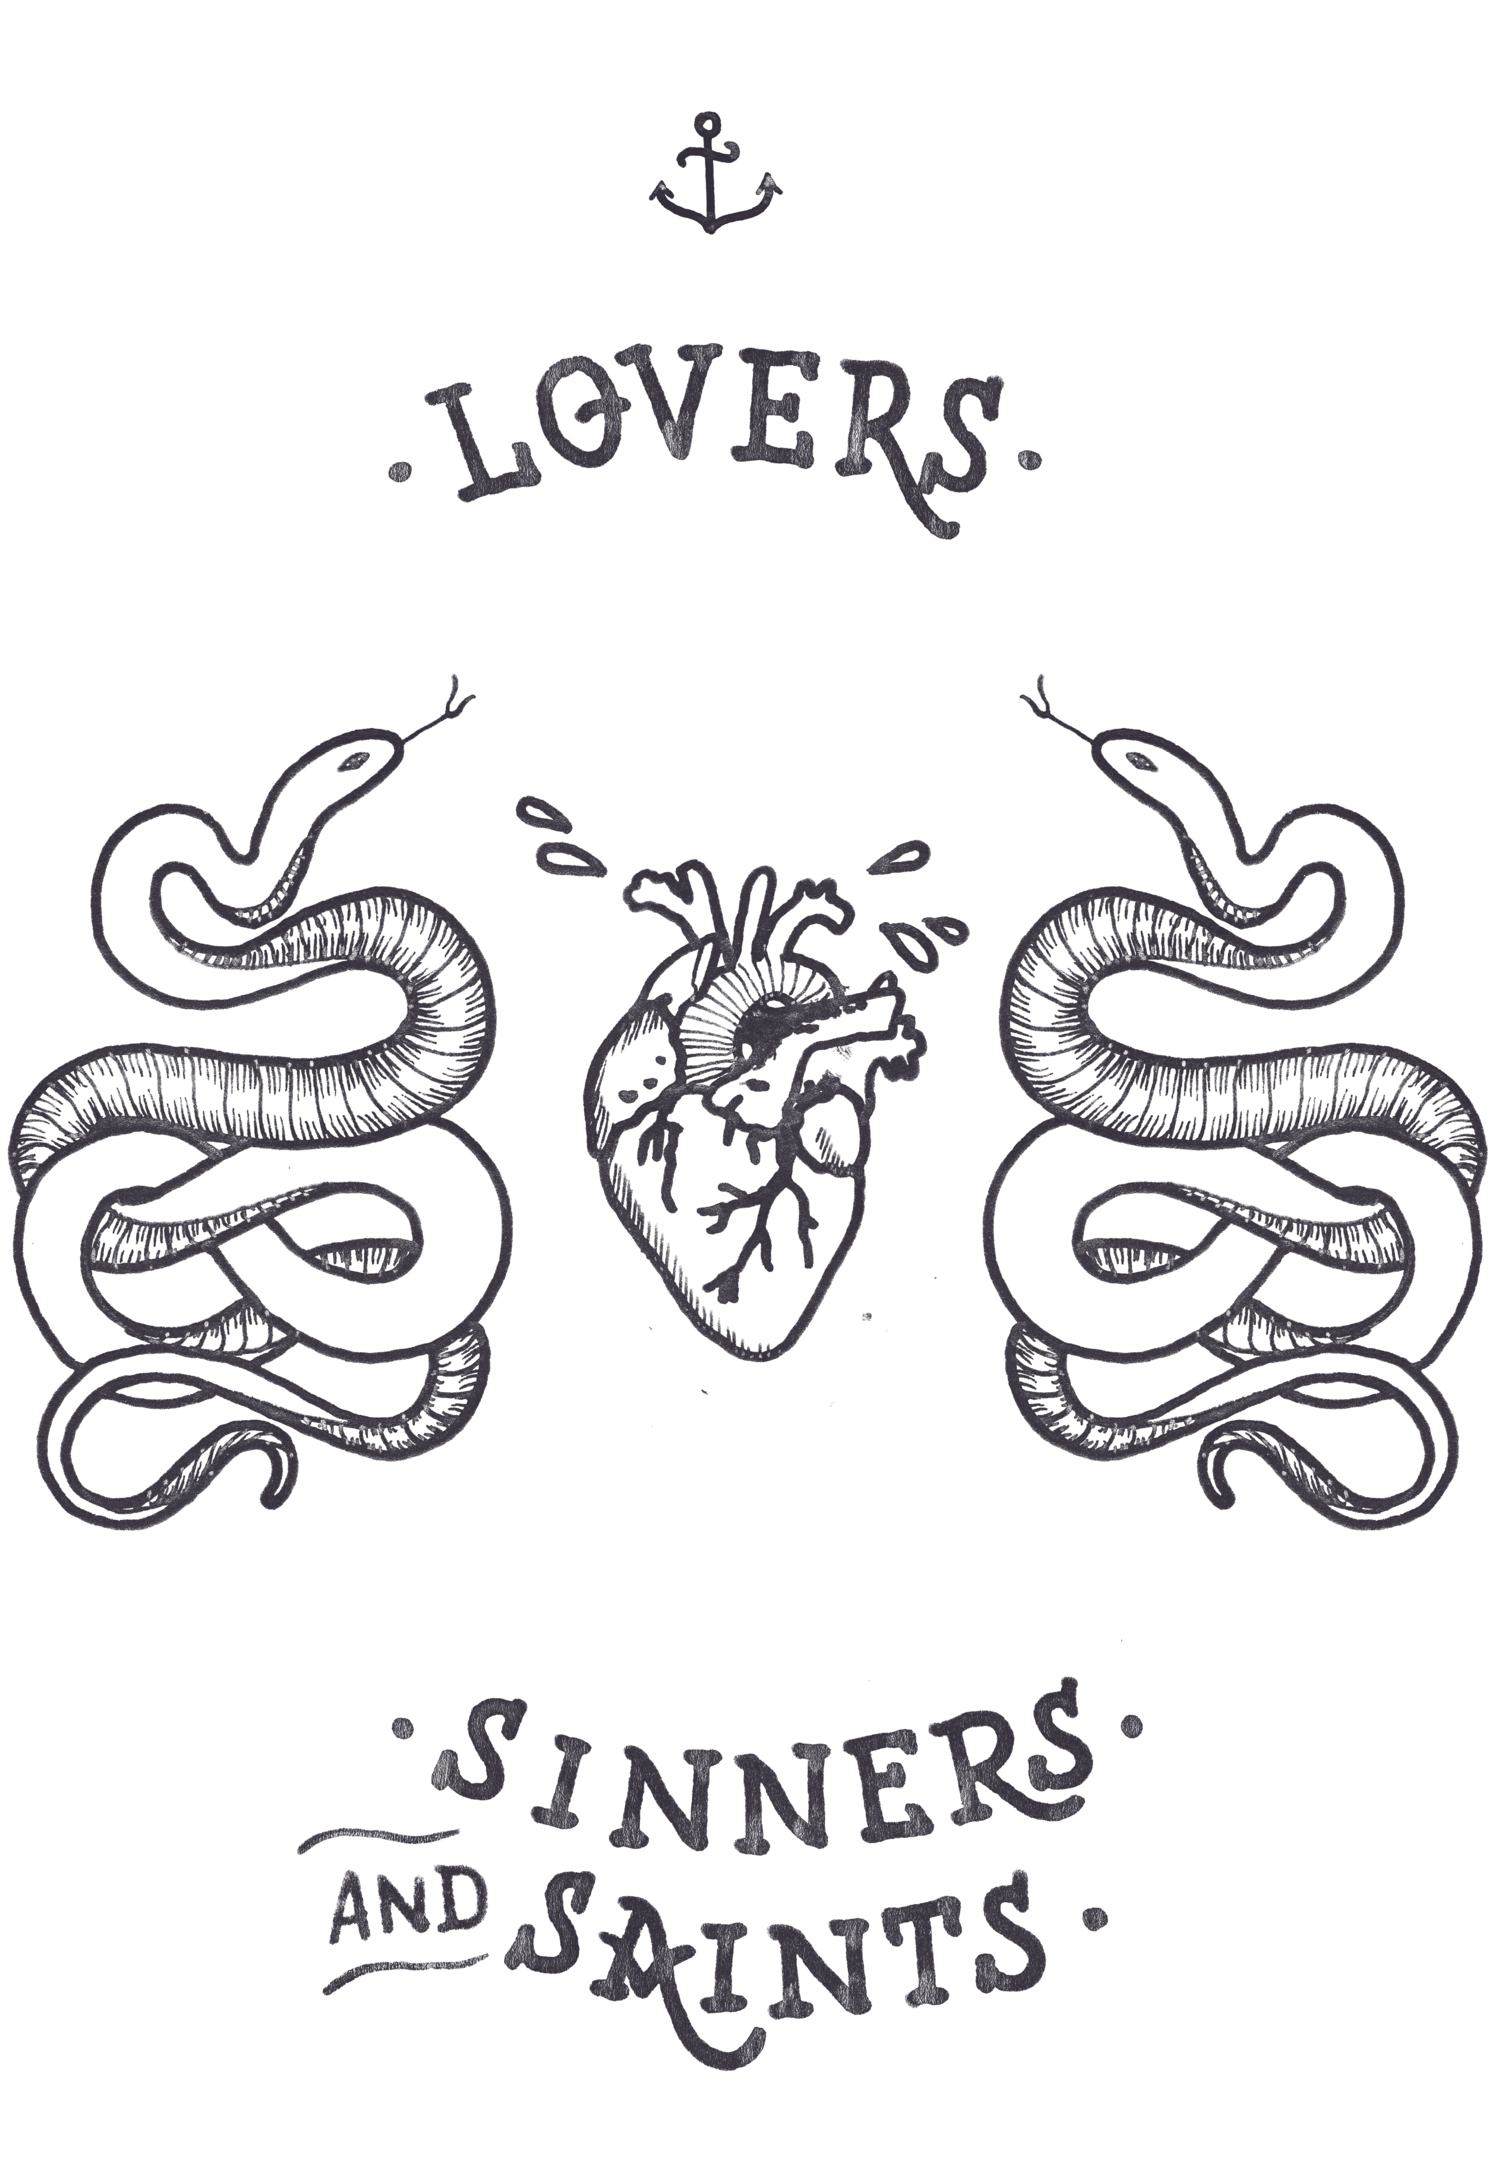 LOVERS SINNERS AND SAINTS